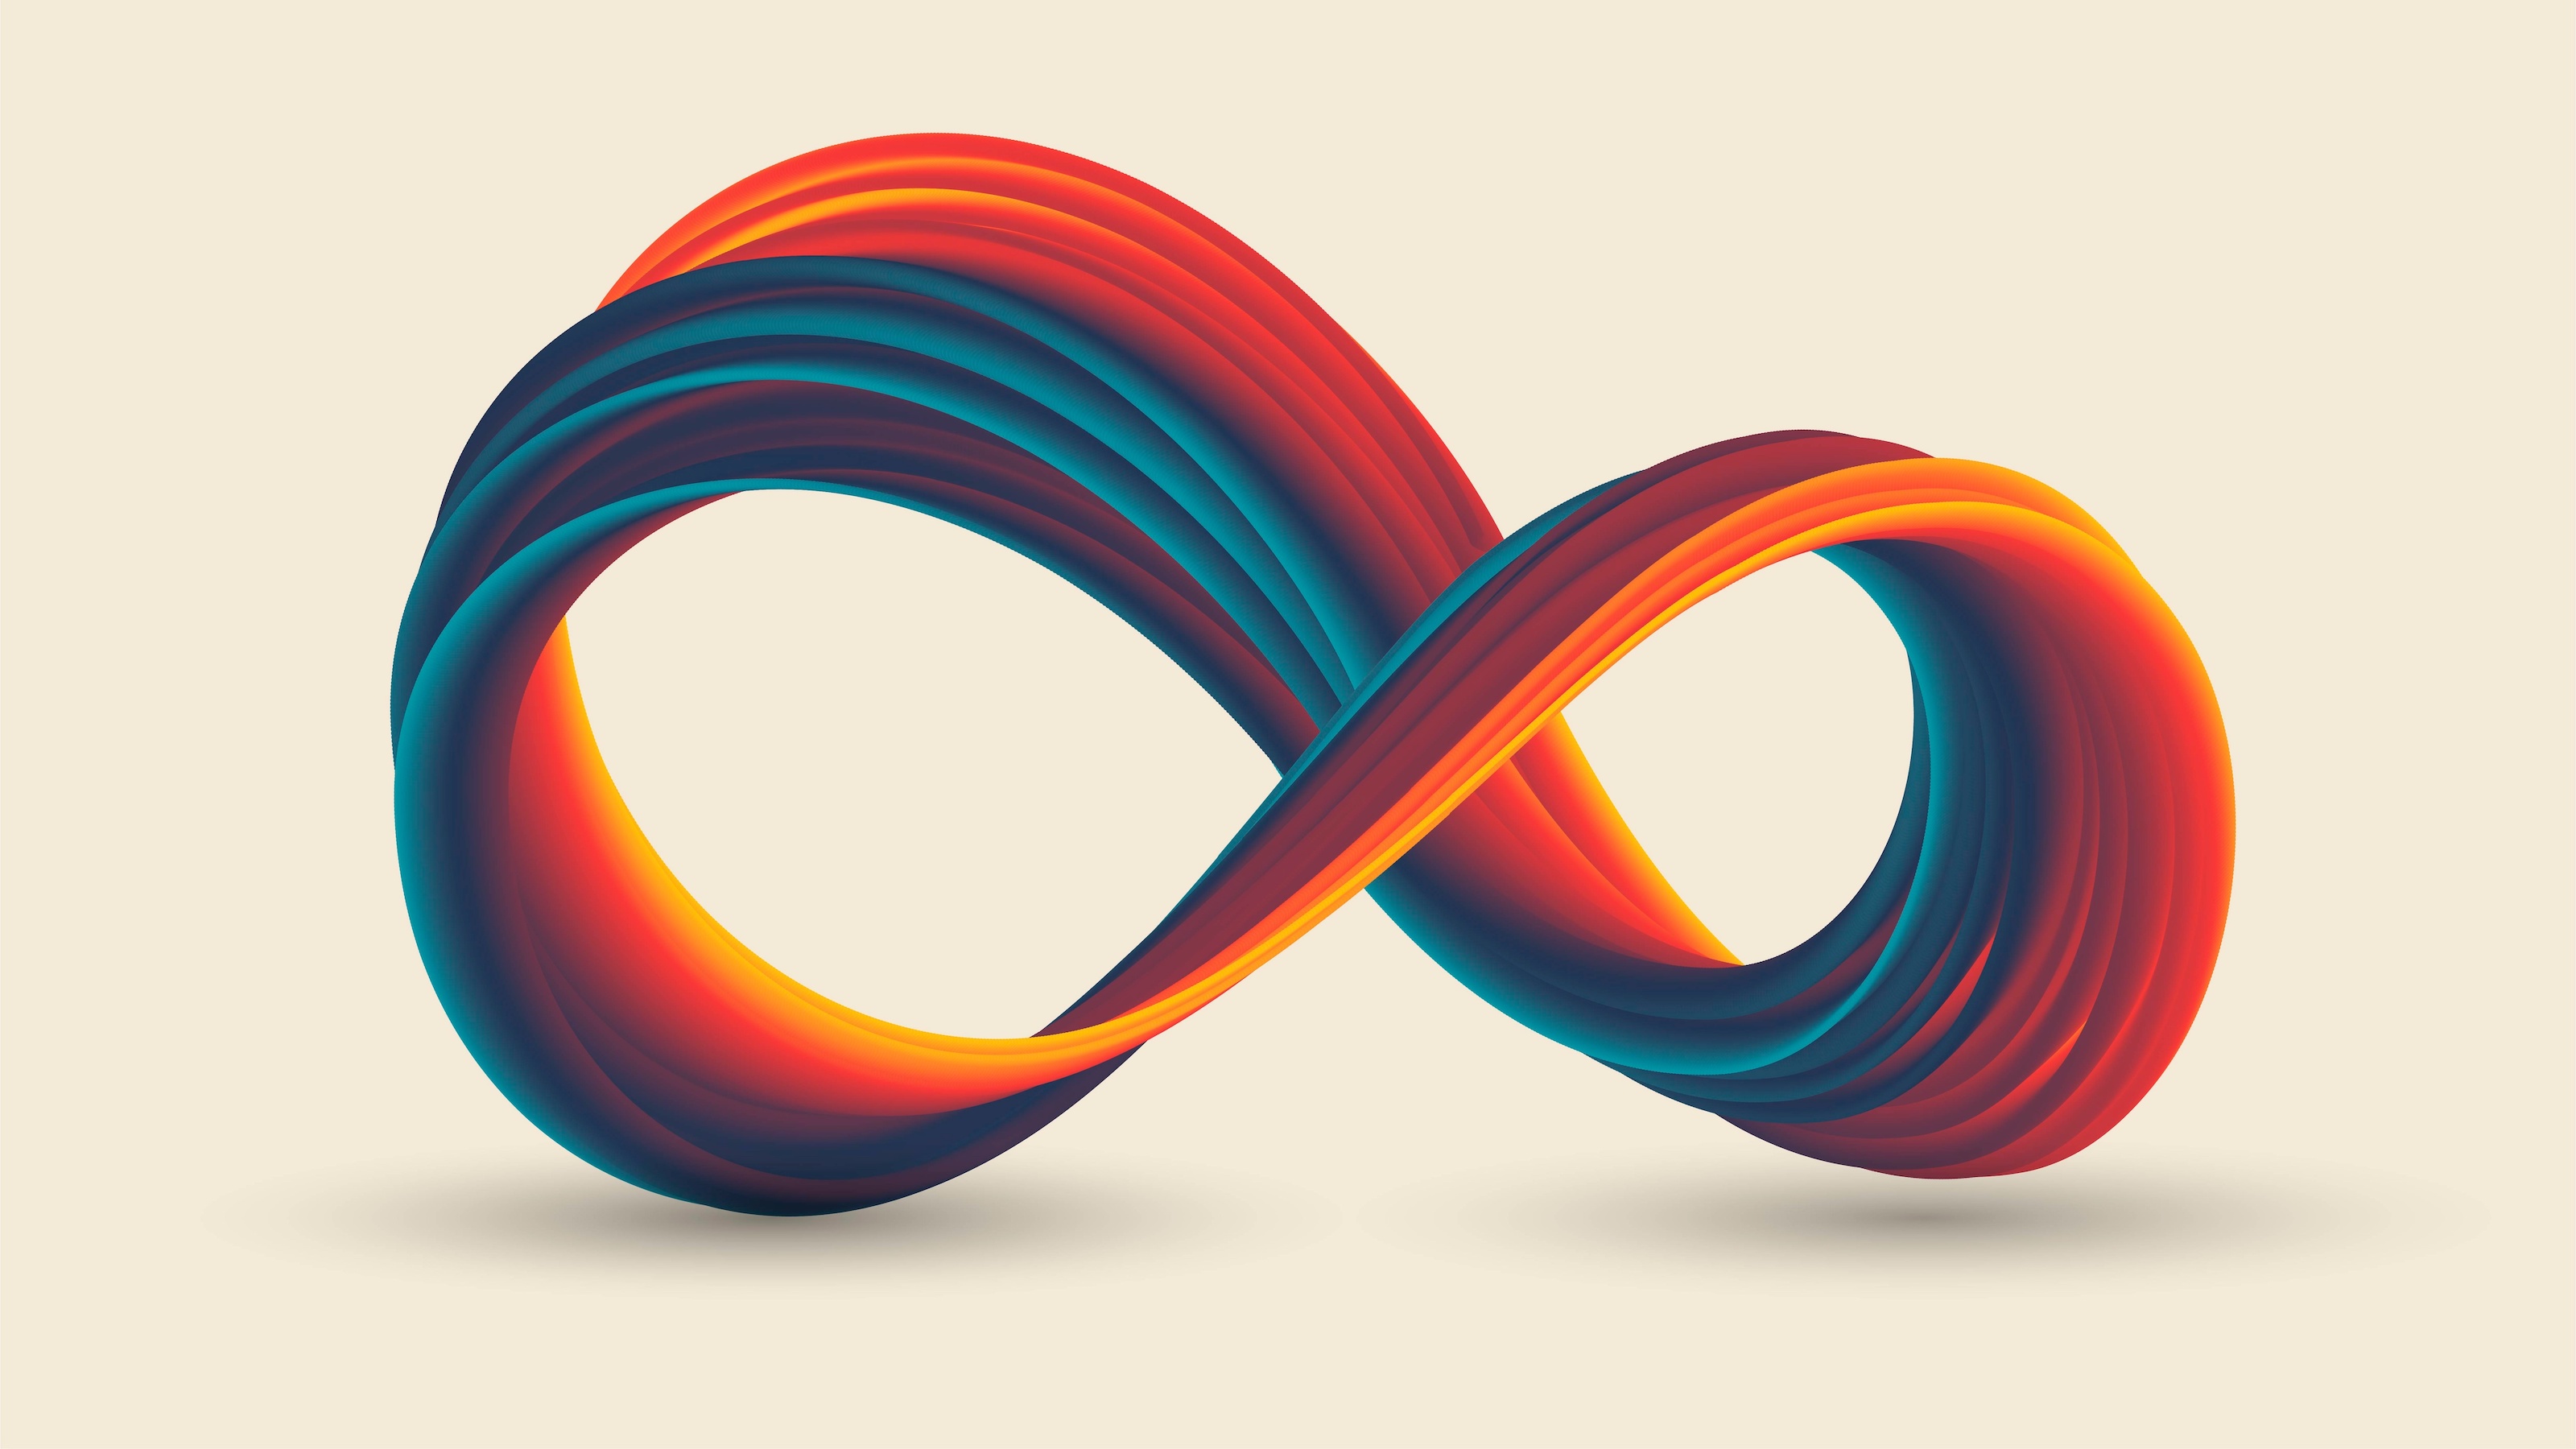 An infinity symbol with colorful swirls on a joyful background.